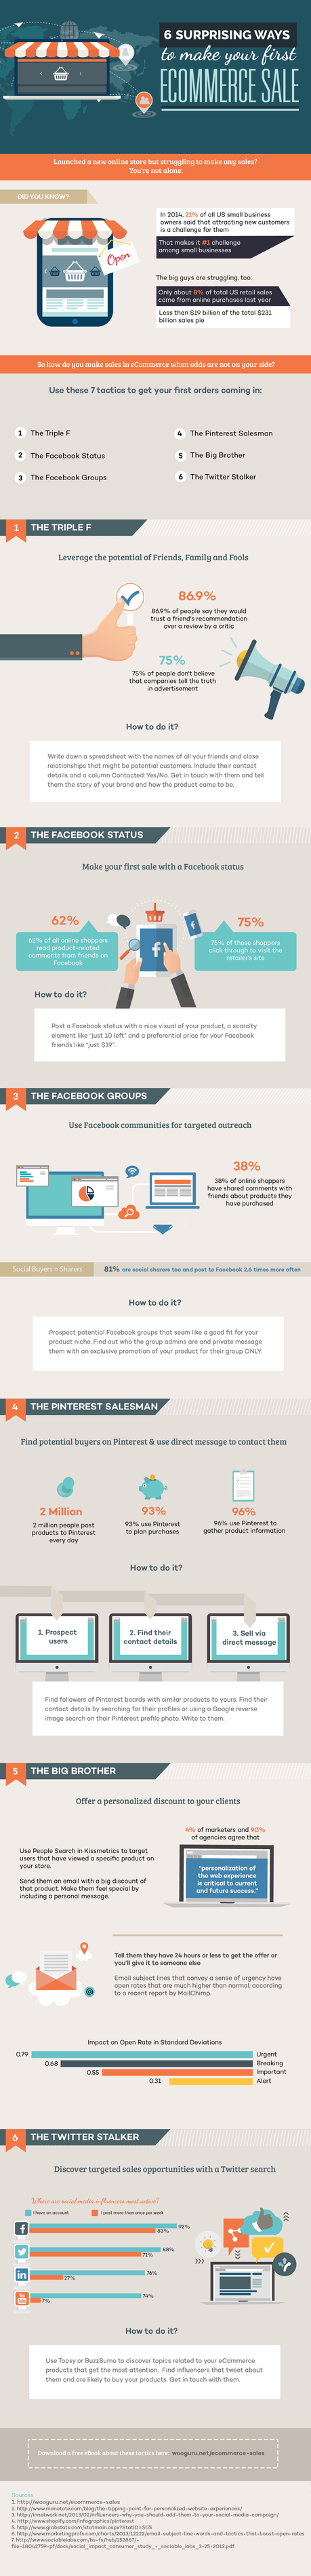 How to Make Your First eCommerce Sale #Infographic